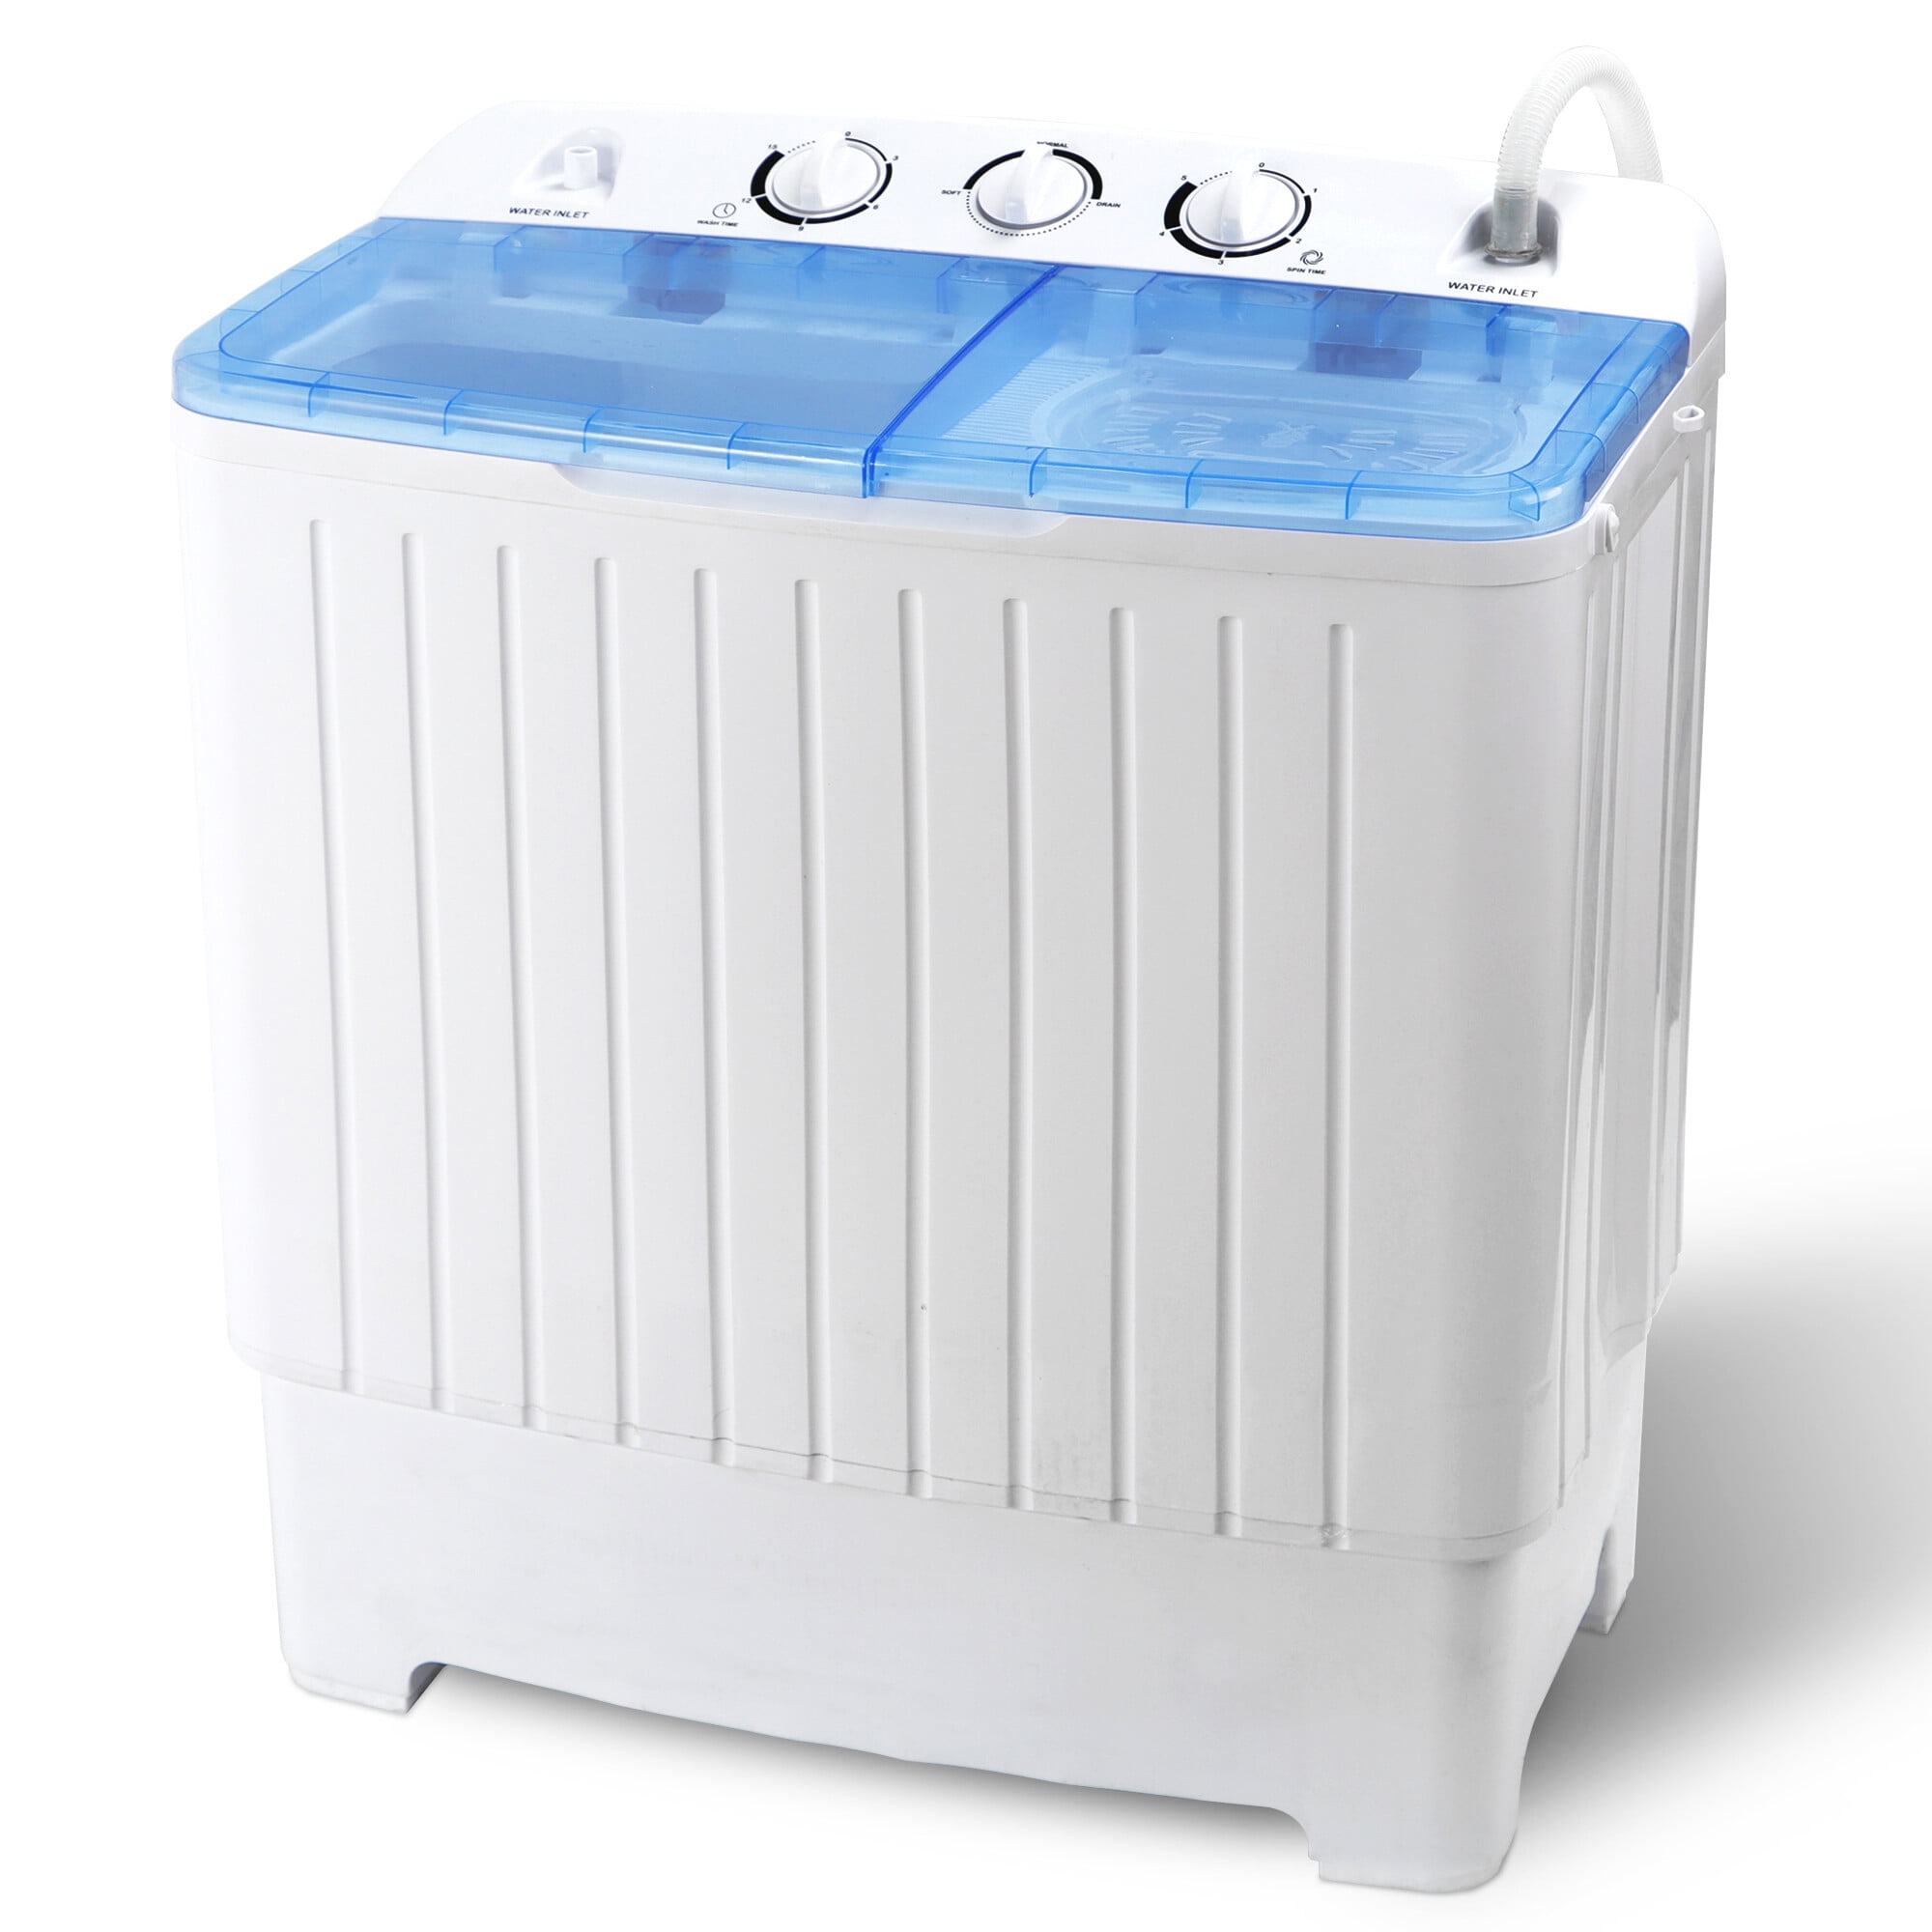 2-in-1 Portable Washing Machine, Linor 28lbs Capacity Twin Tub Compact  Washer, Washer and Spinner Dryer with Control Knobs, Timer, Drain Pump, Laundry  Washer for Apartment, RVs, Camping Trips, White 